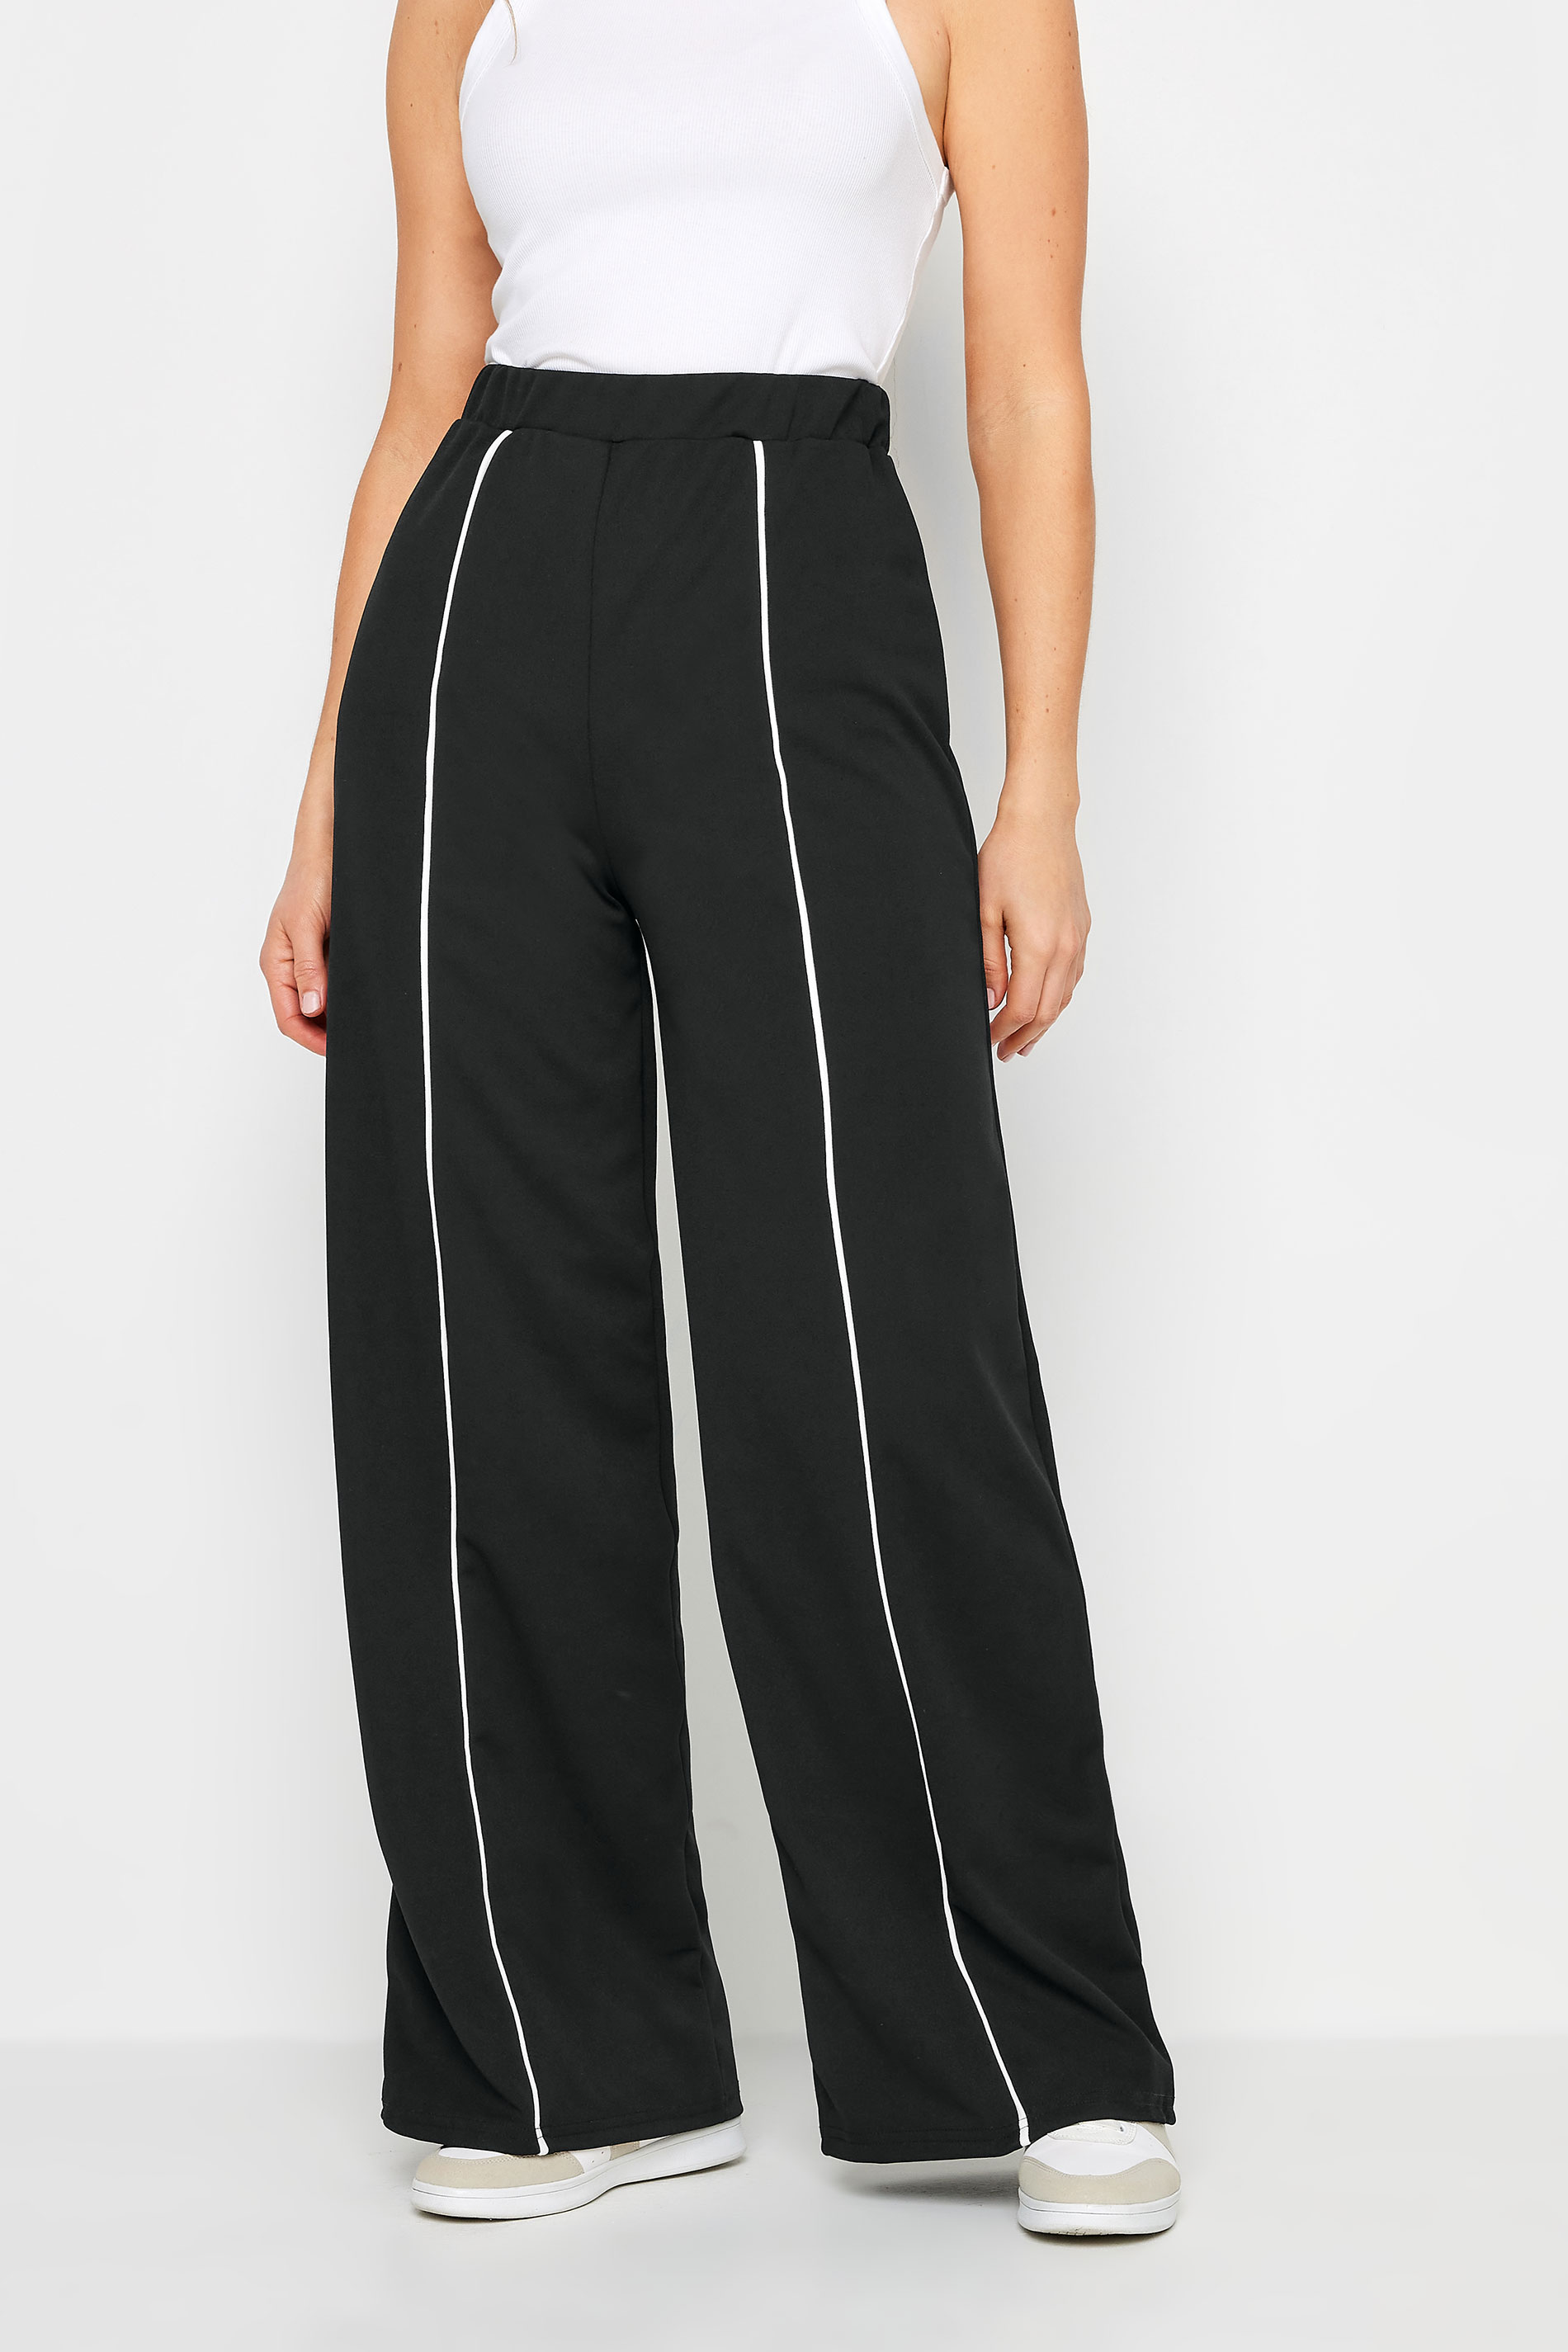 LTS Tall Womens Black Contrast Pipe Detail Wide Leg Trousers | Long Tall Sally 2